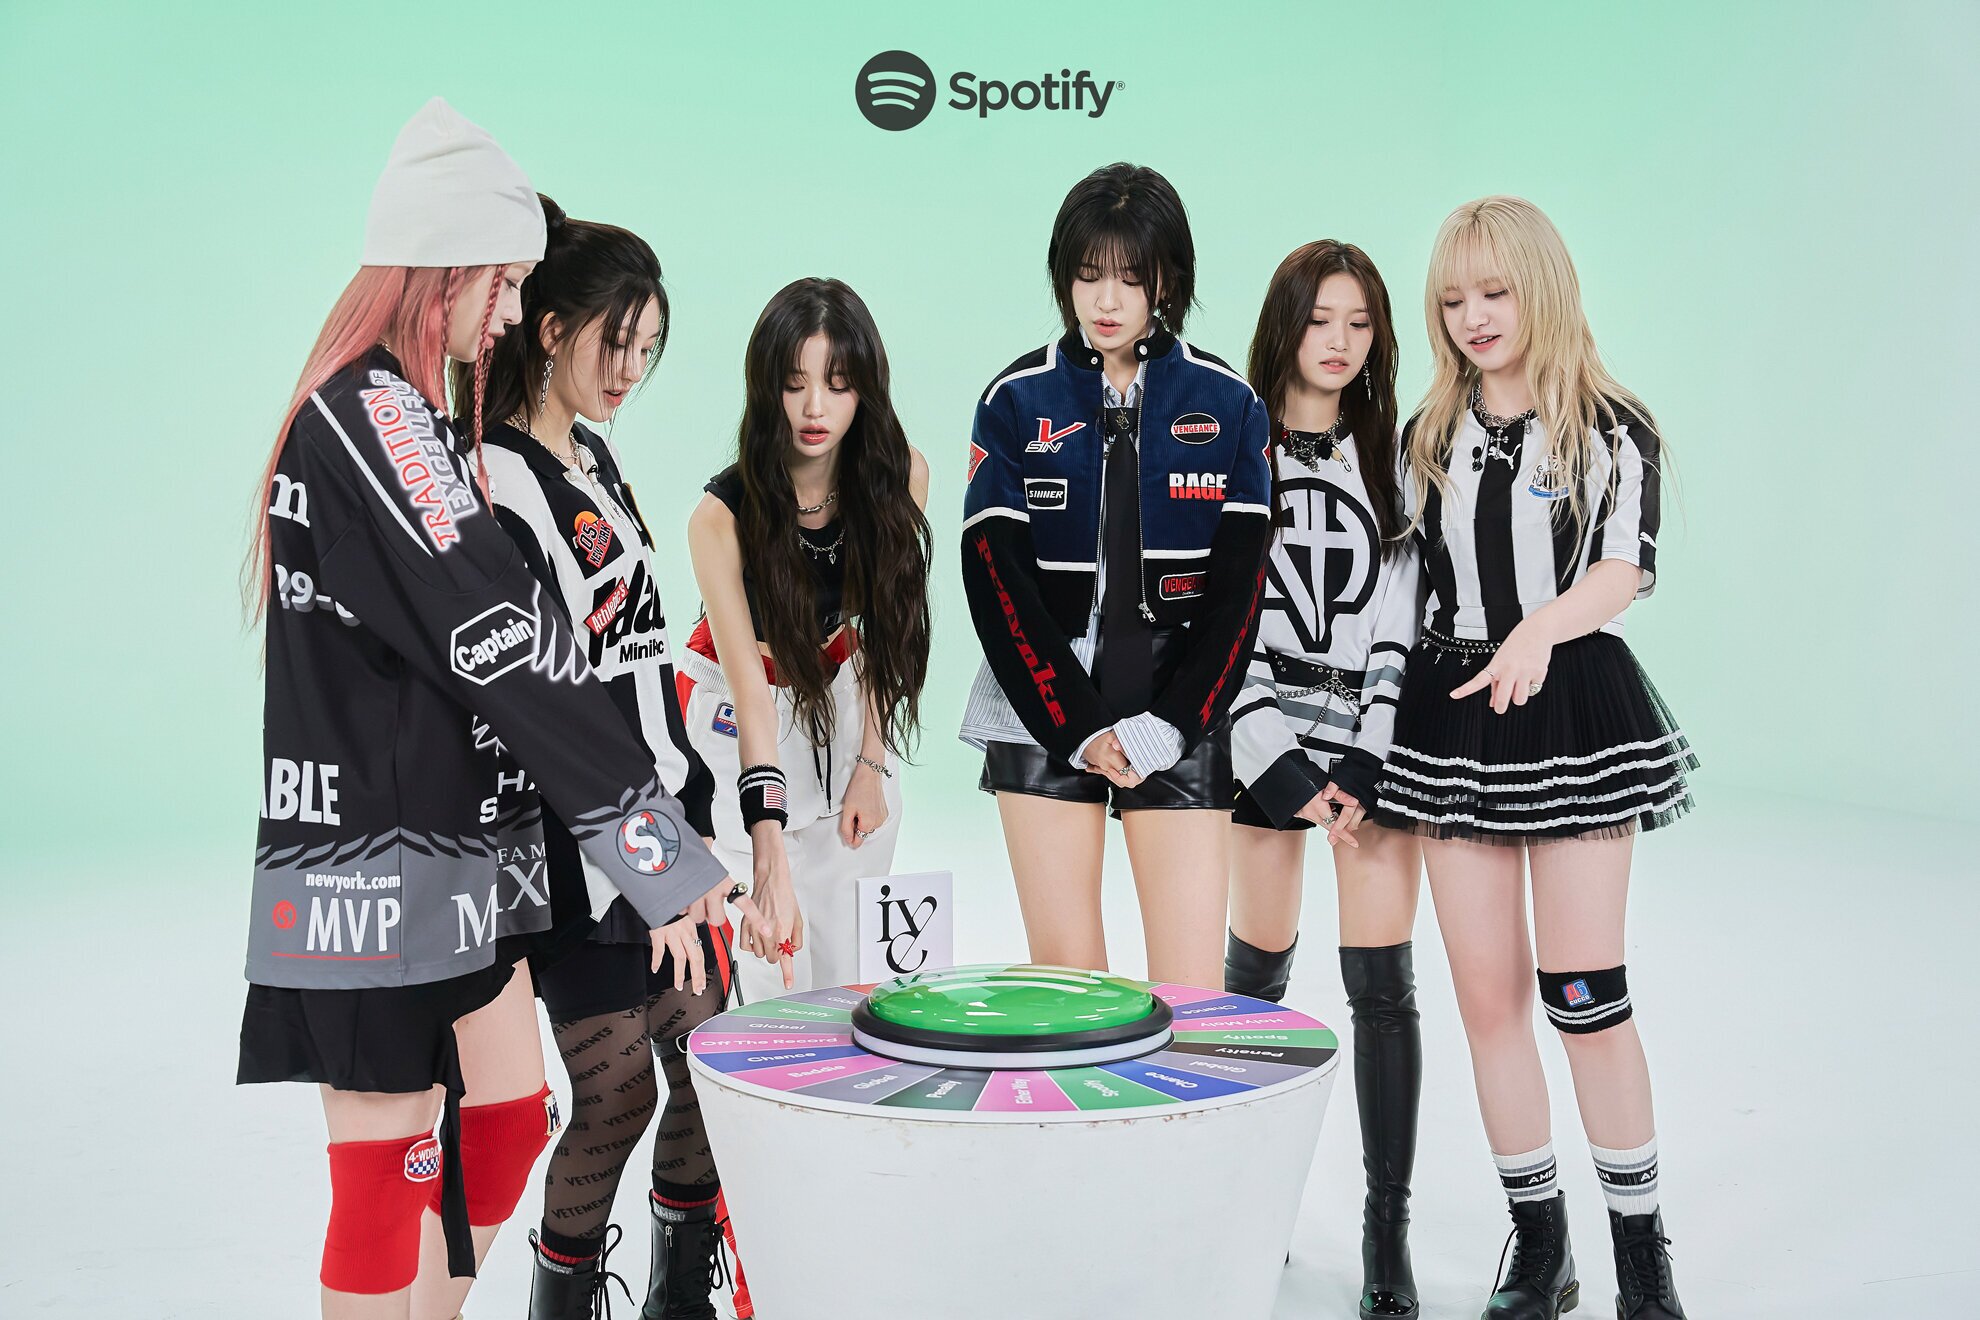 231013 Spotify Twitter Update - IVE | kpopping